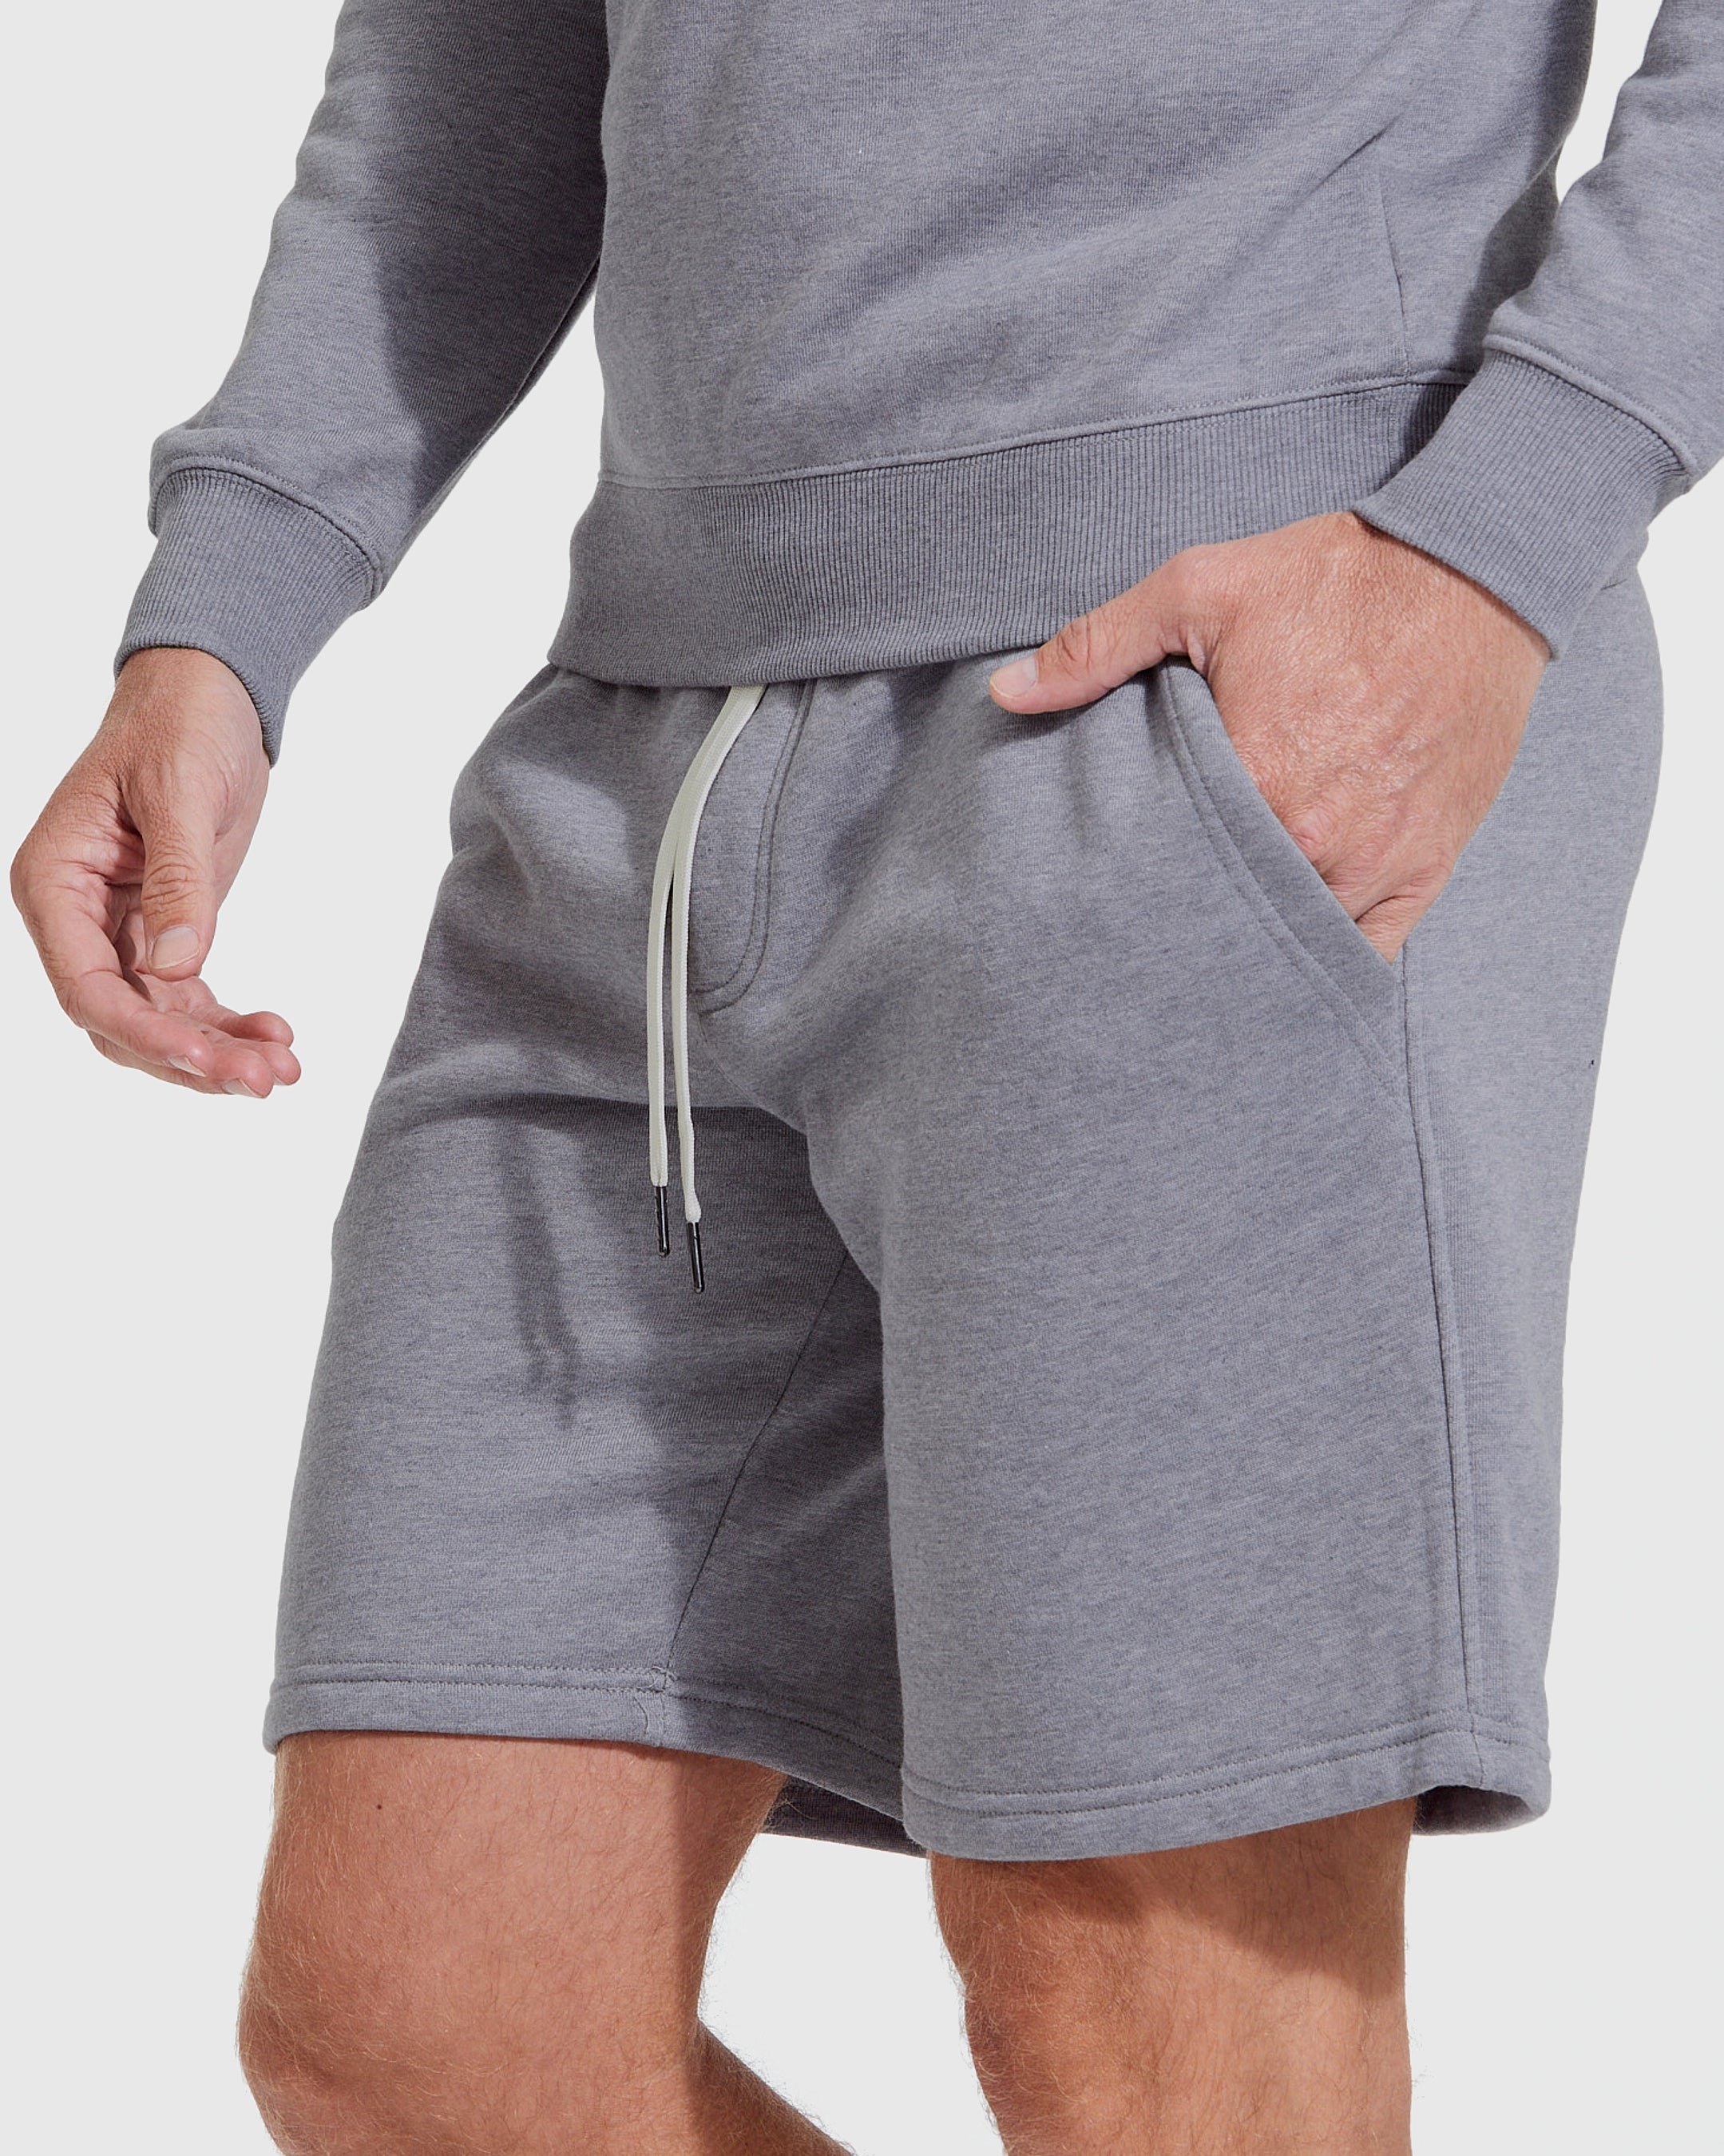 Heather Gray Fleece French Terry Shorts